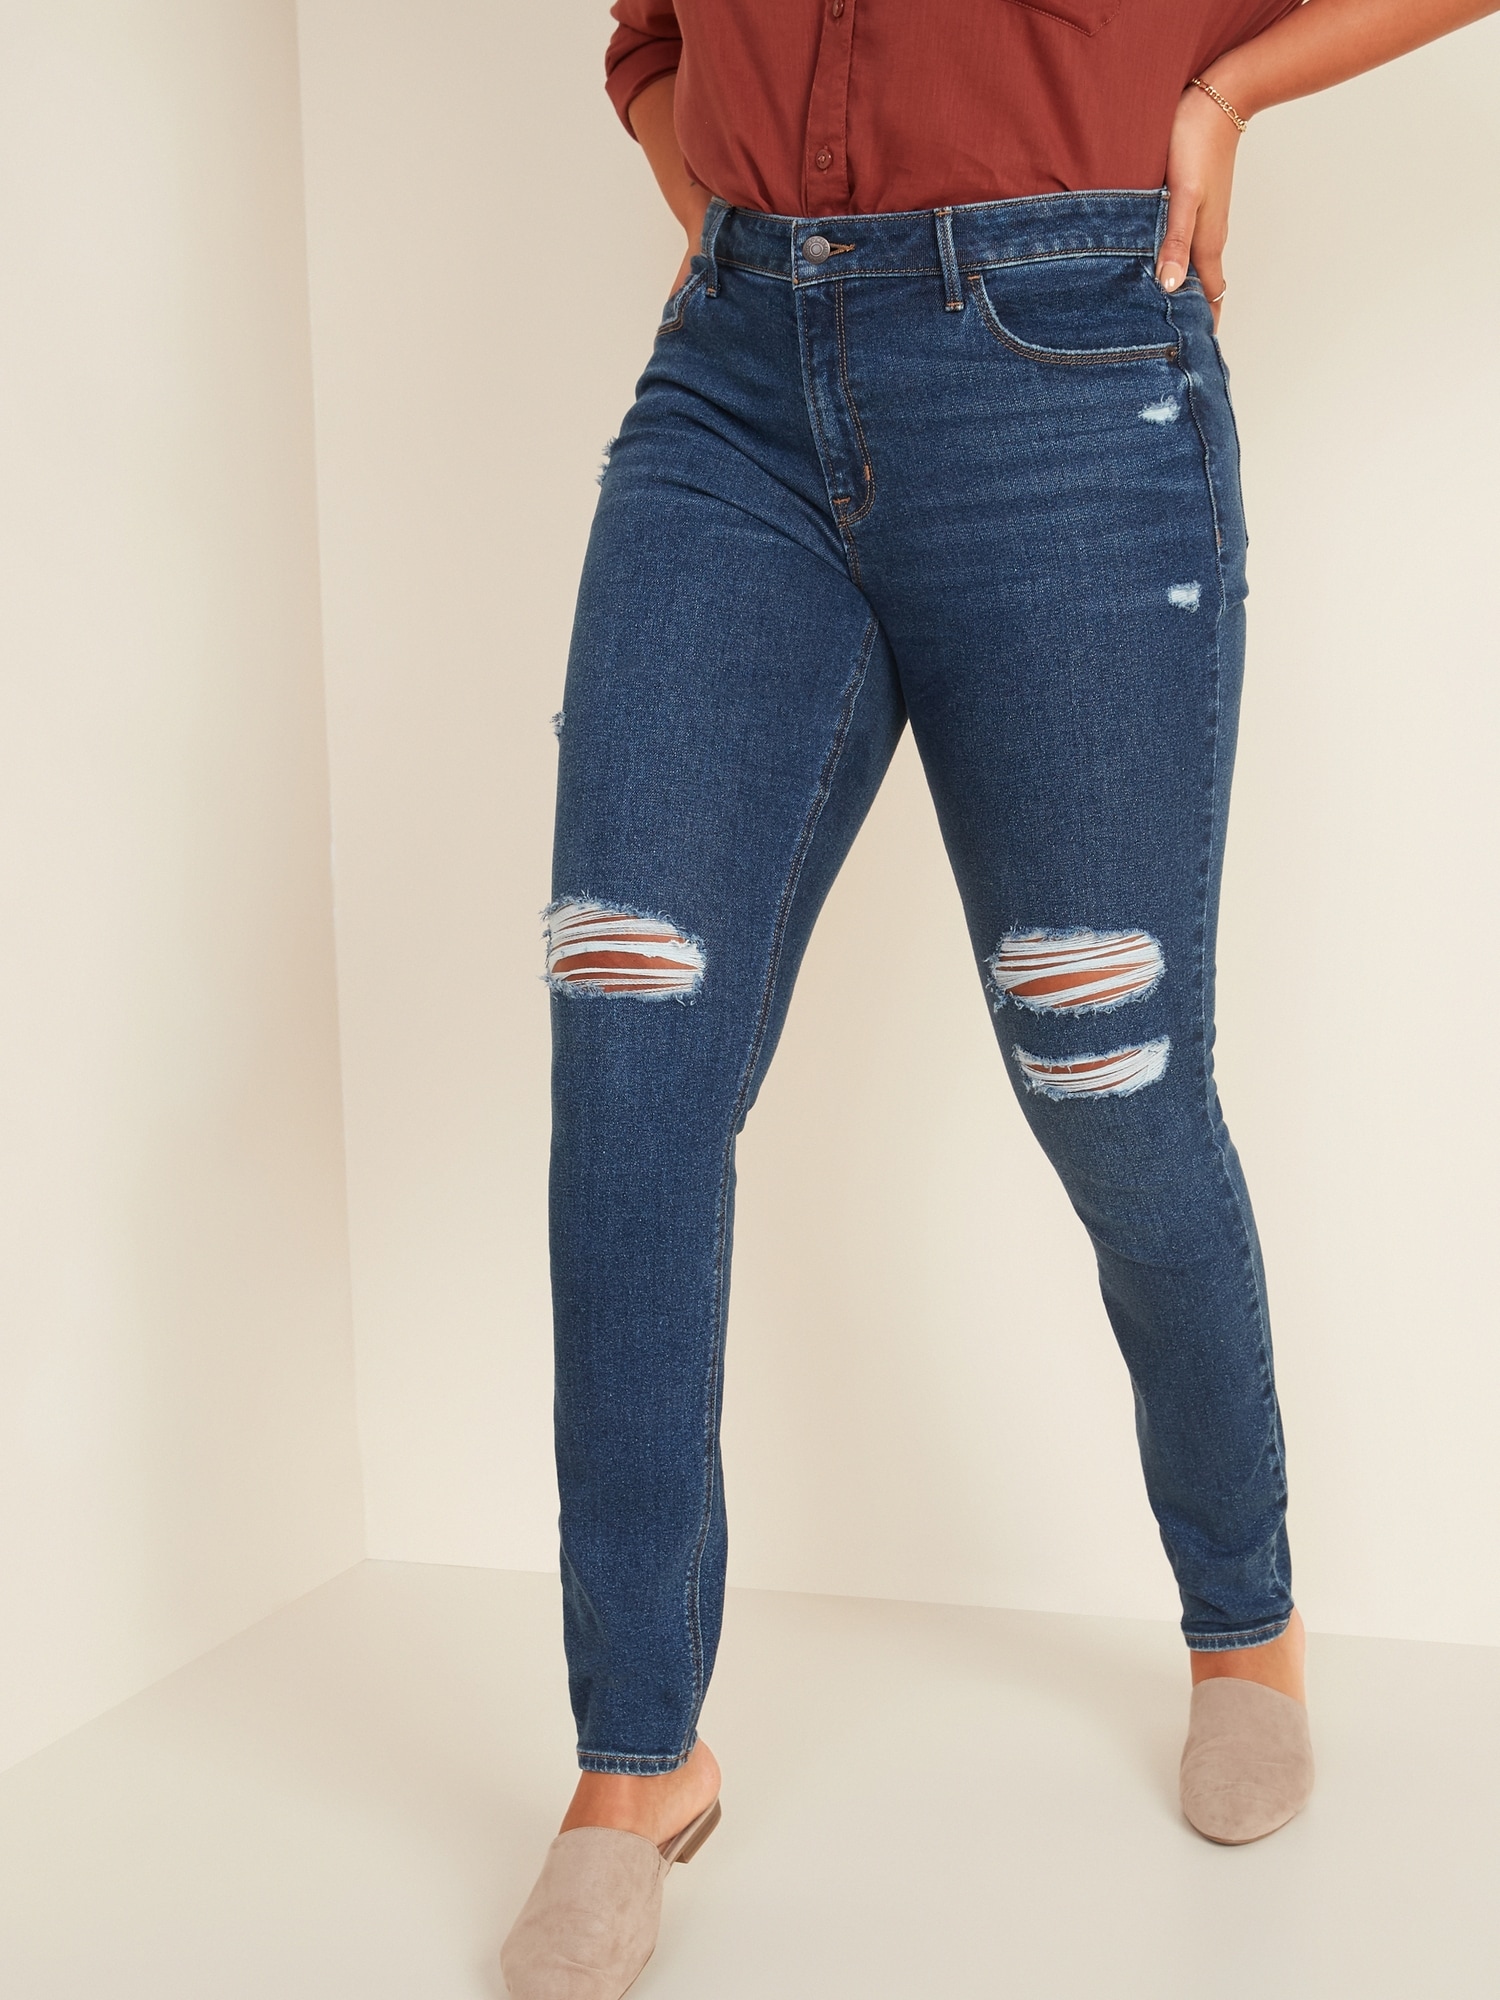 Mid-Rise Rockstar Super Skinny Ripped Jeans for Women